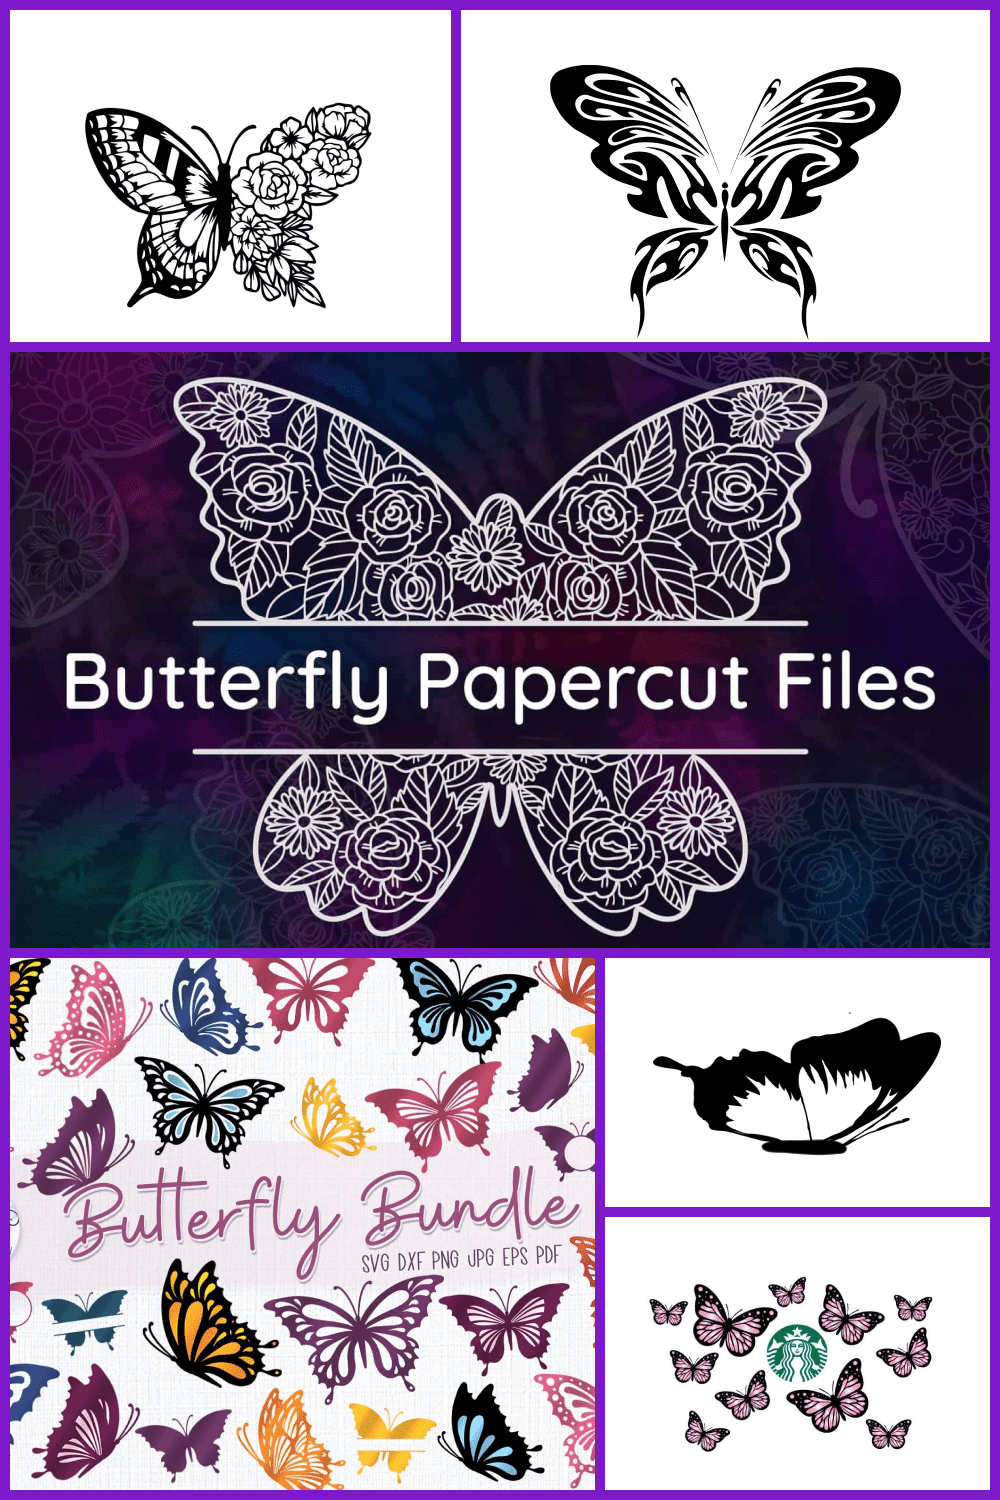 Butterfly SVG Images Pinterest.